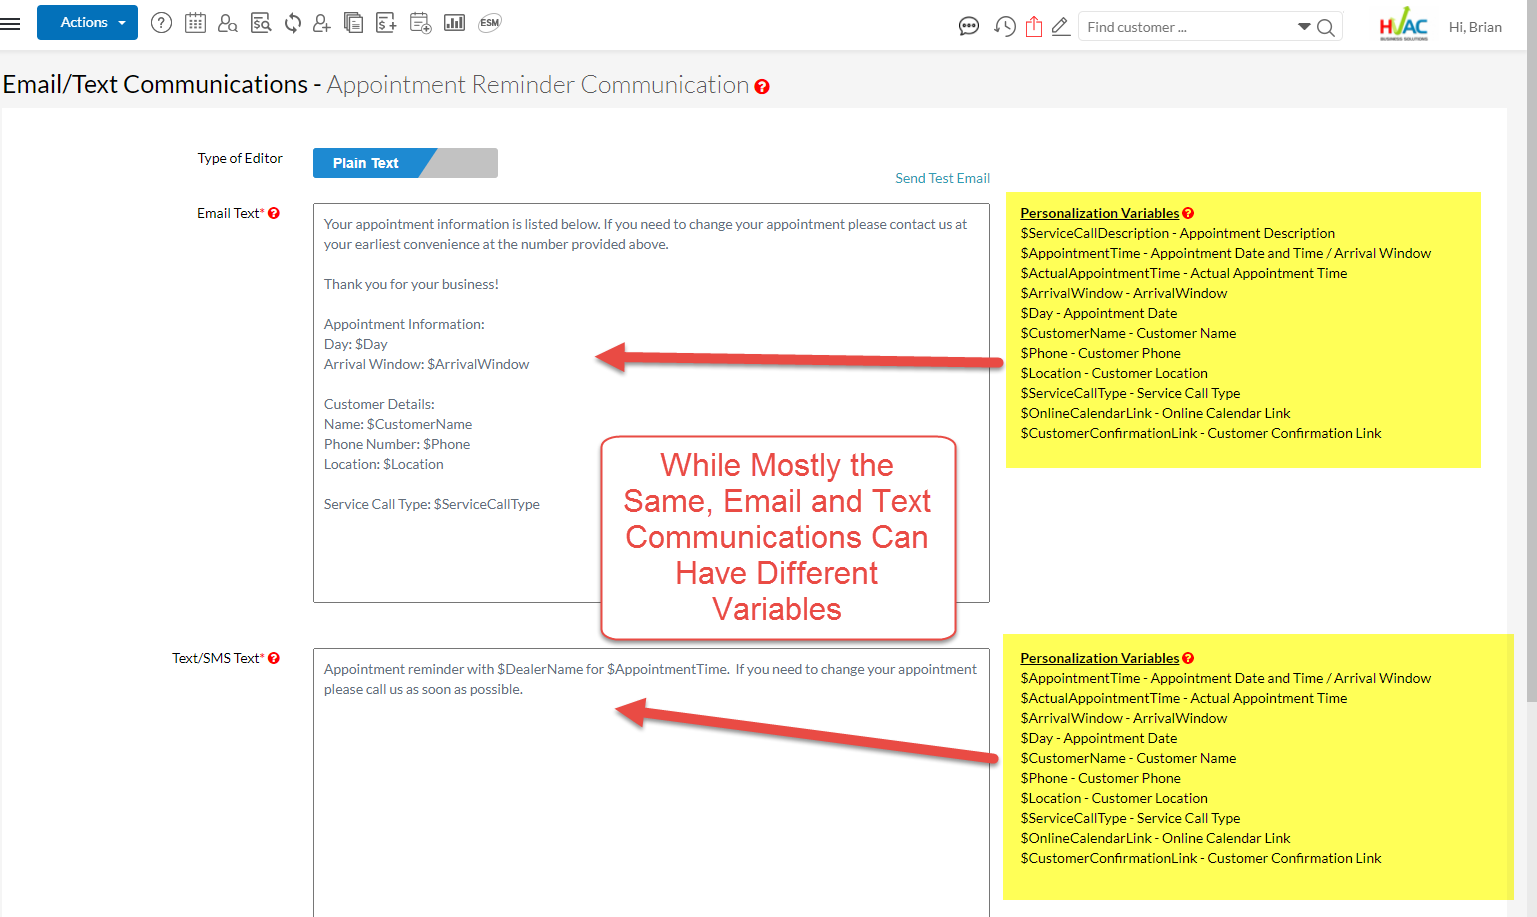 Personalization Variables for Both Email and Text Communications